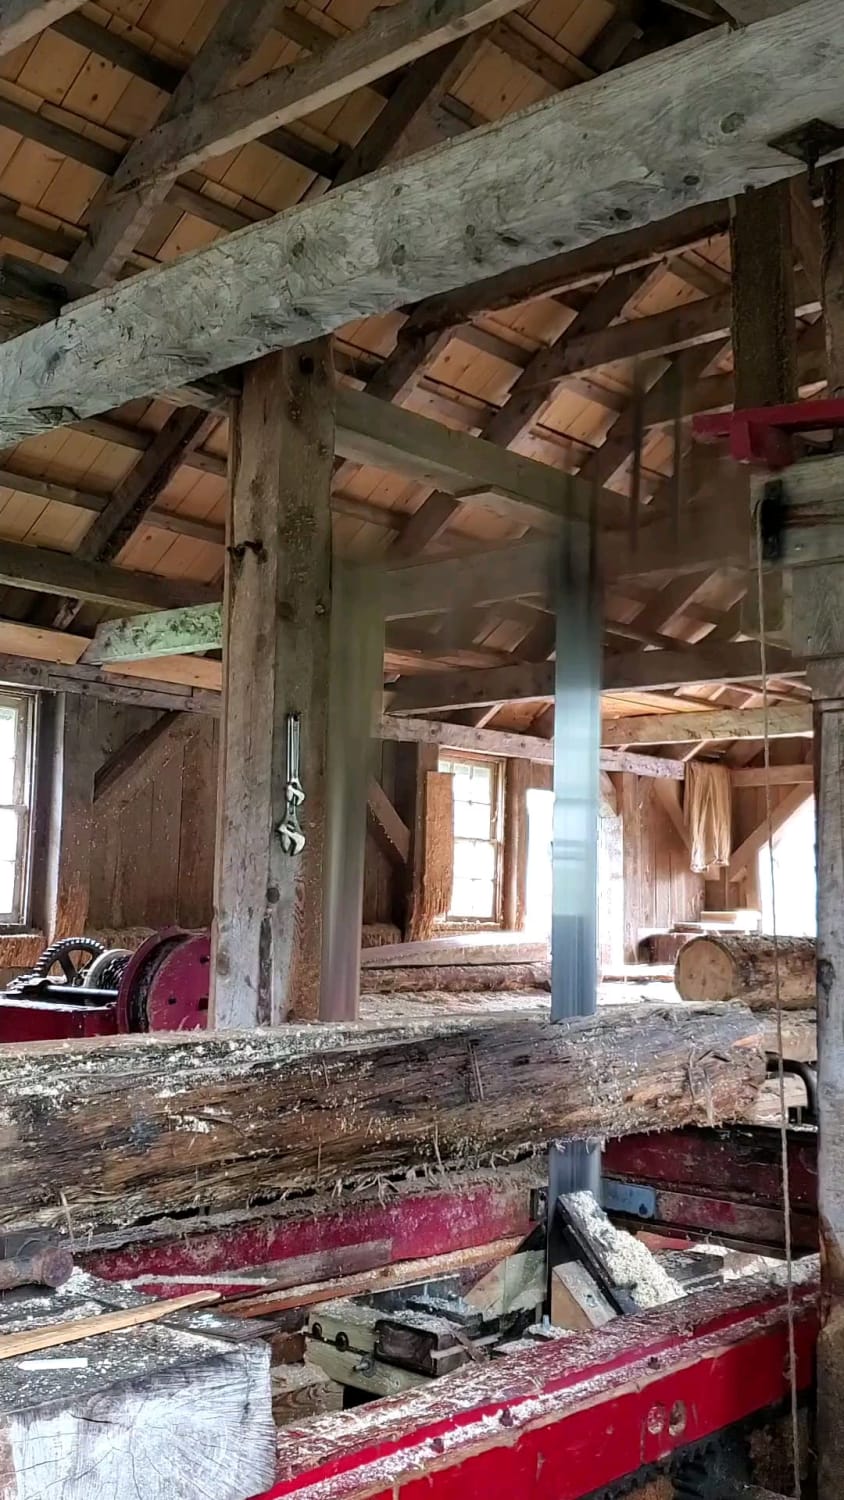 Here is a time-lapse of a water powered sawmill I'm working at in action.